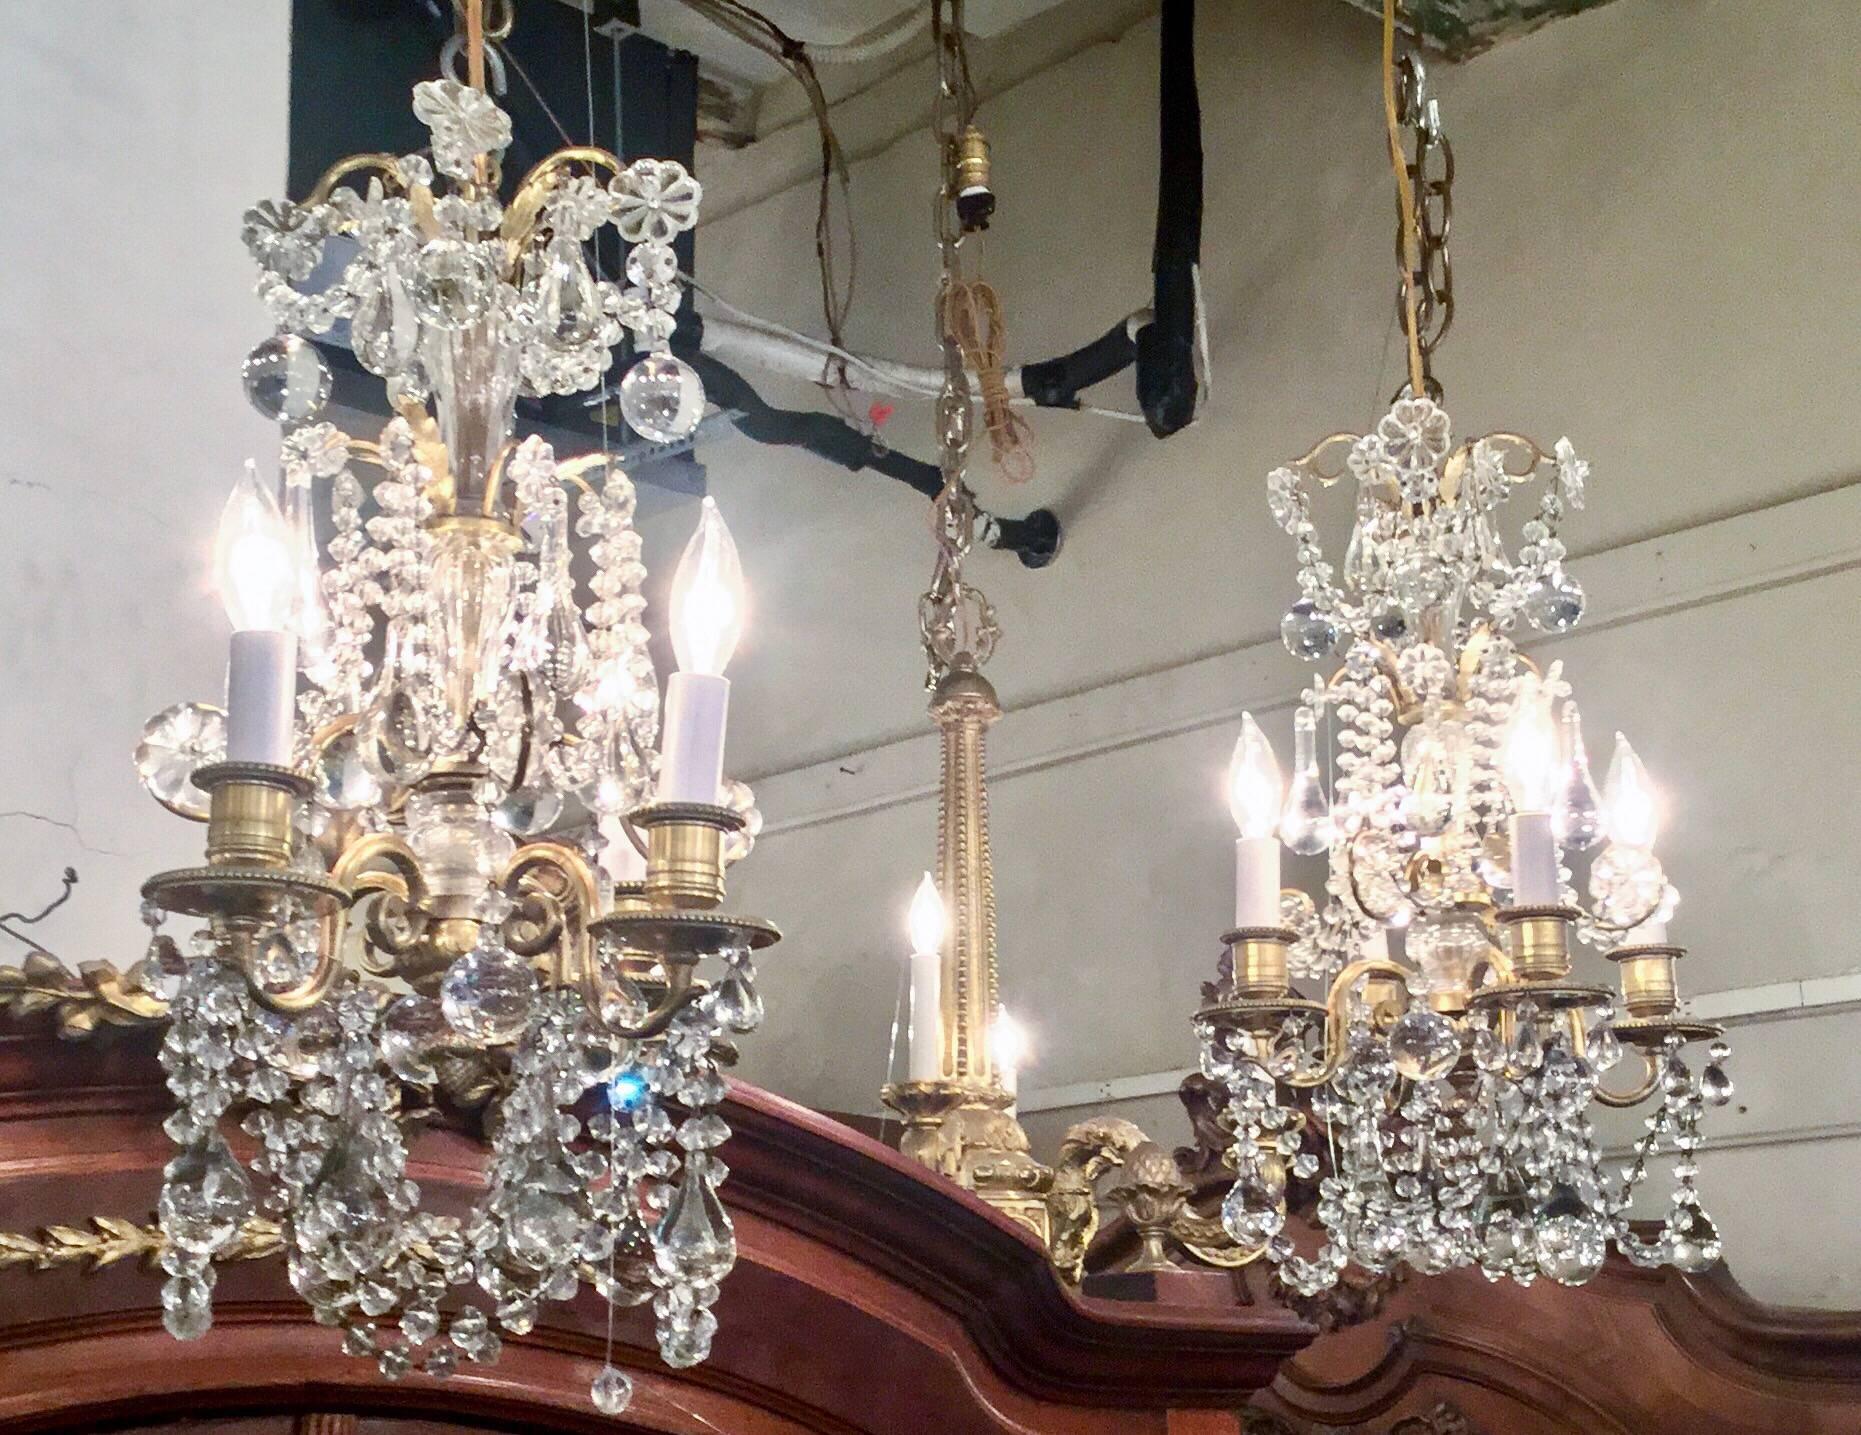 Pair of antique French bronze doré and Baccarat crystal chandeliers, circa 1880.